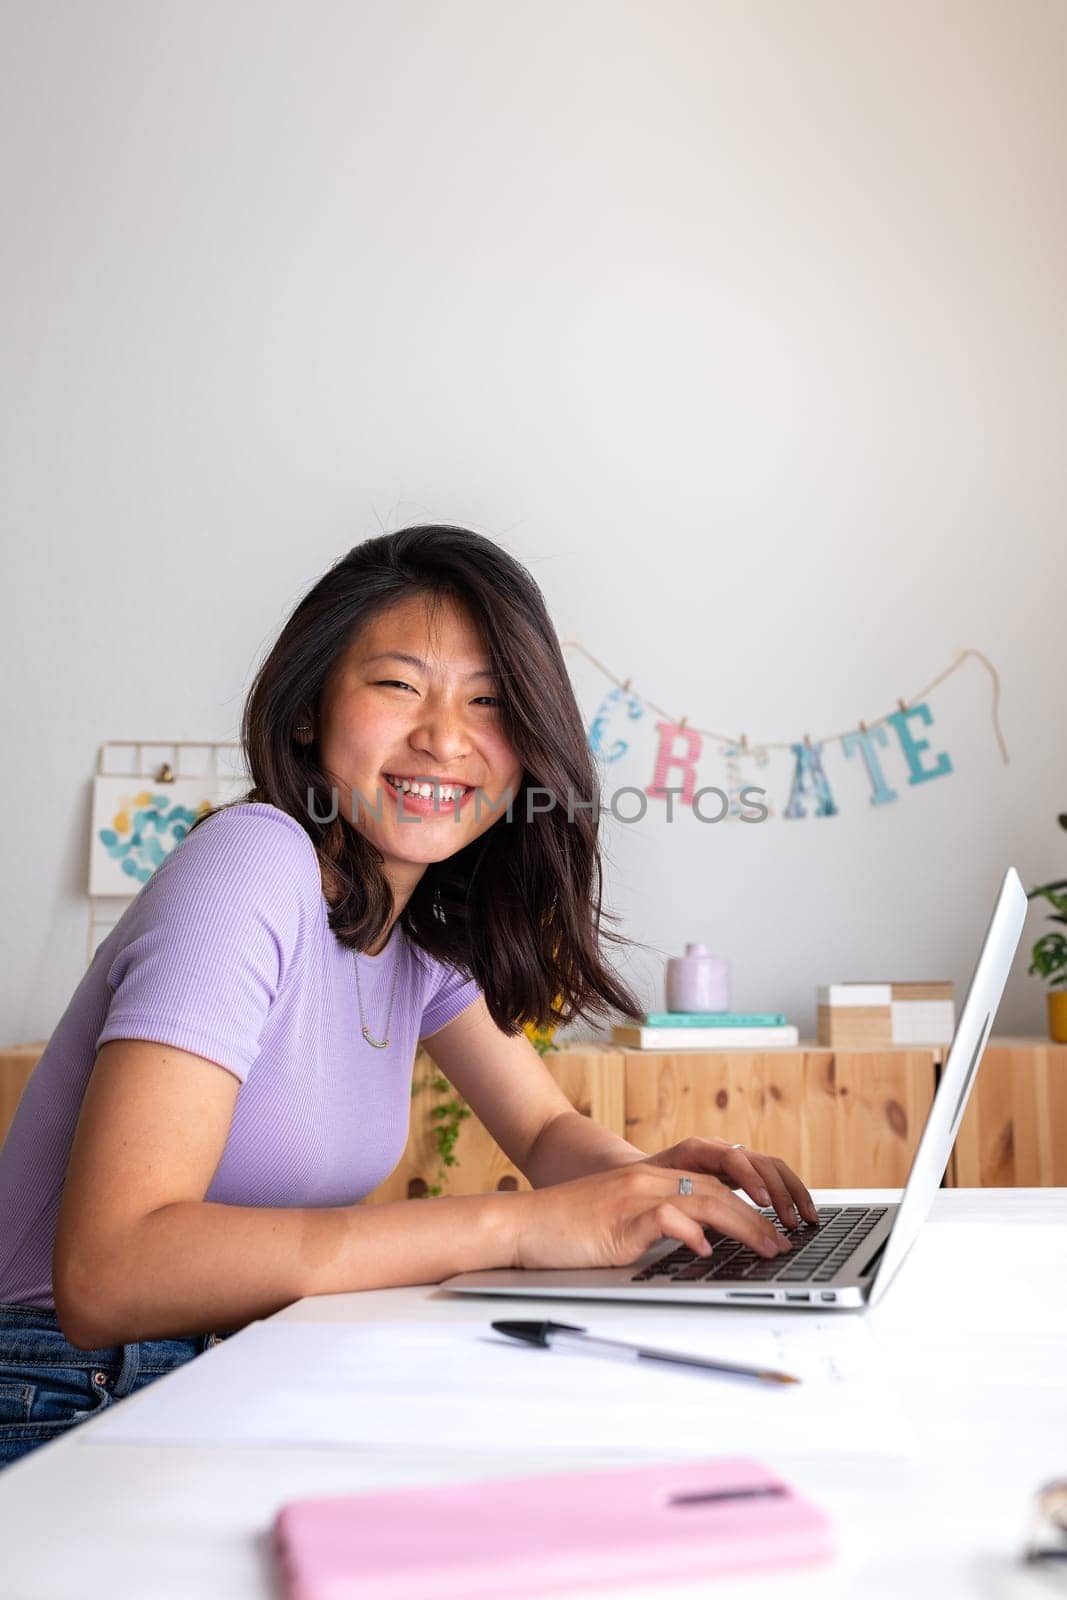 Vertical portrait of happy, smiling teen asian female college student studying at home, doing homework using laptop looking at camera. Copy space. Education, e-learning concept.